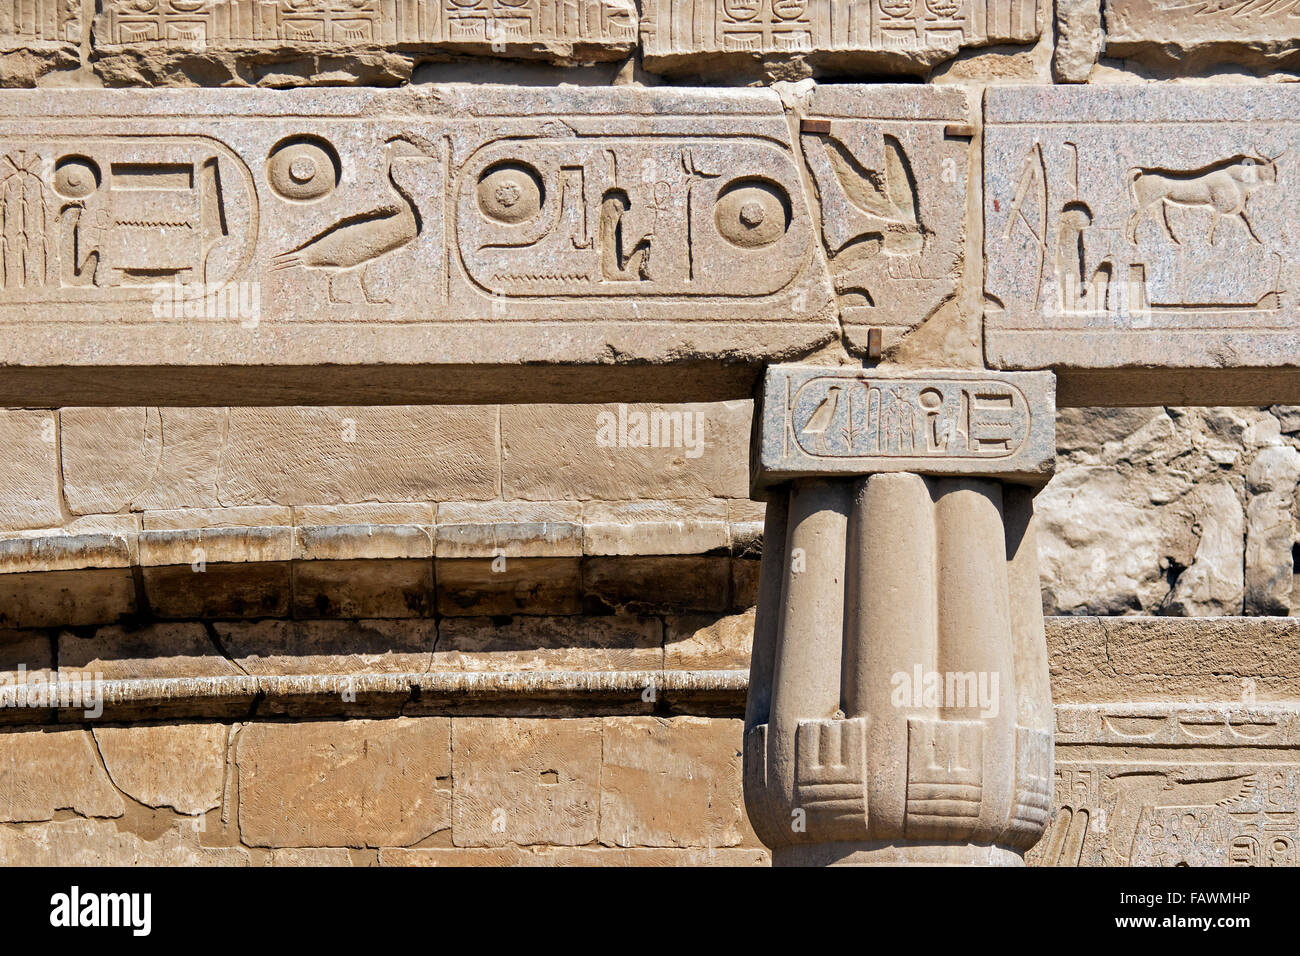 Detail showing ancient Egyptian hieroglyphs on wall of the Luxor Temple in Egypt Stock Photo